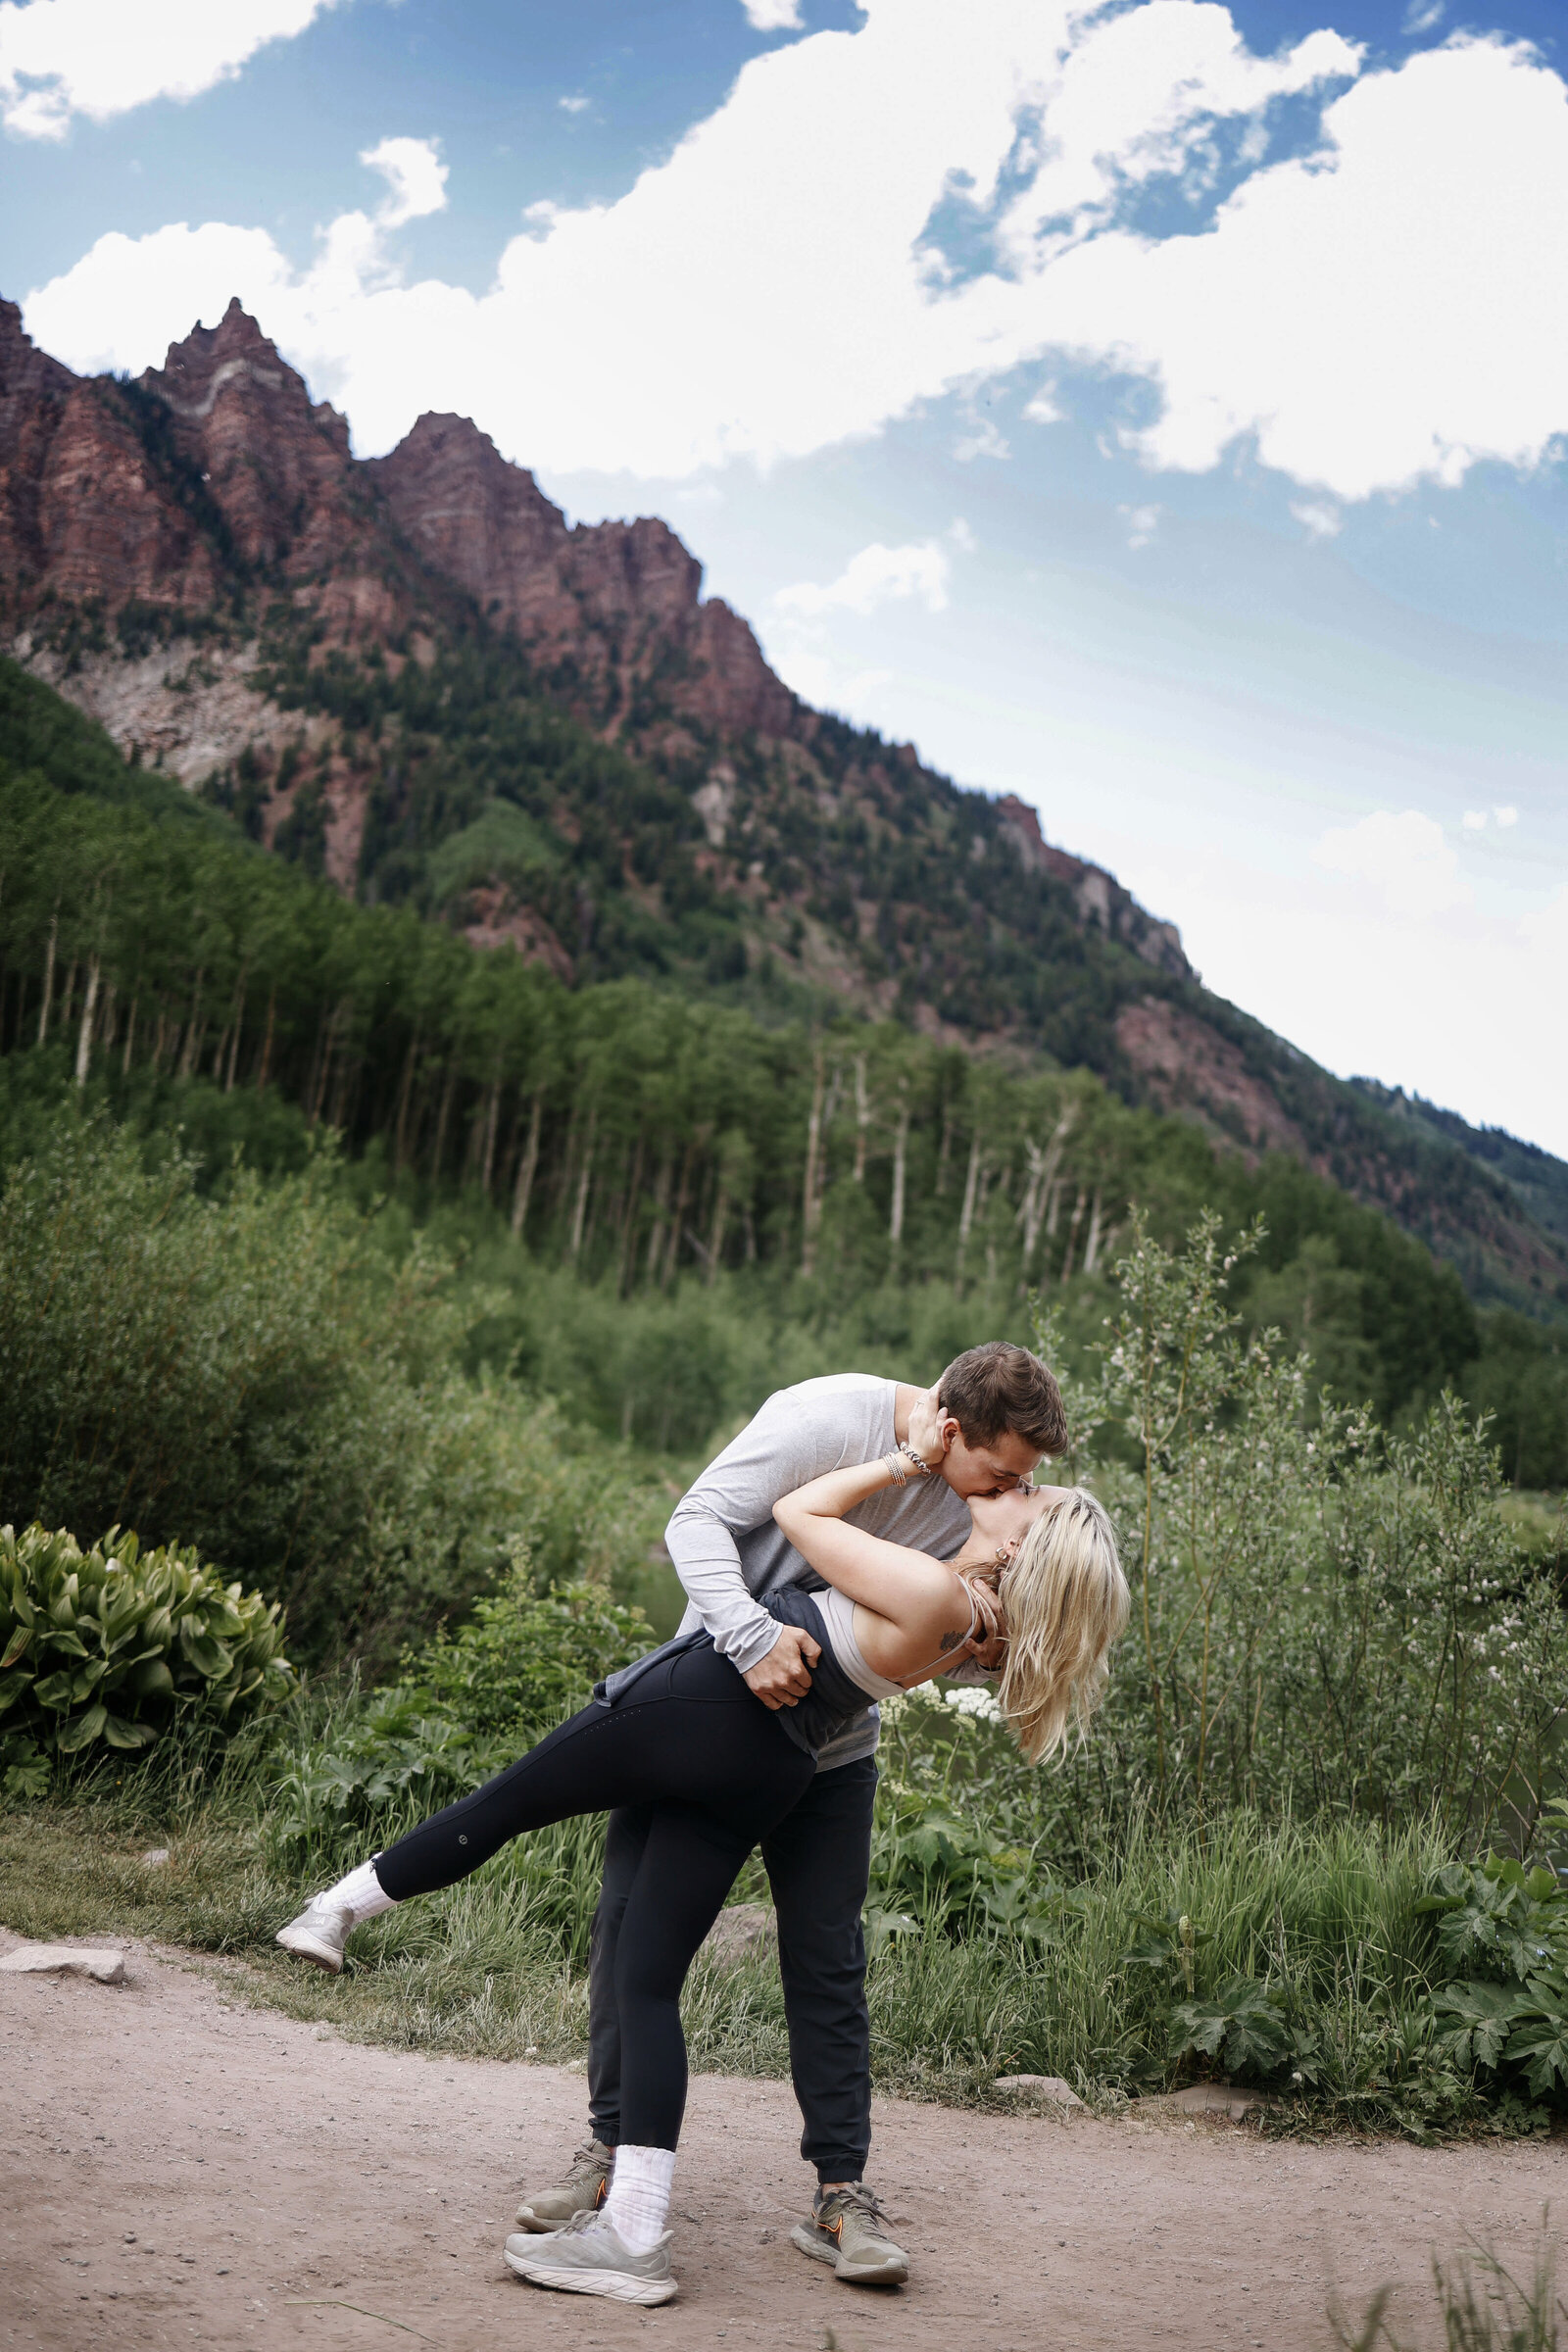 A cute couple kisses with the Maroon Bells mountains in the backdrop.